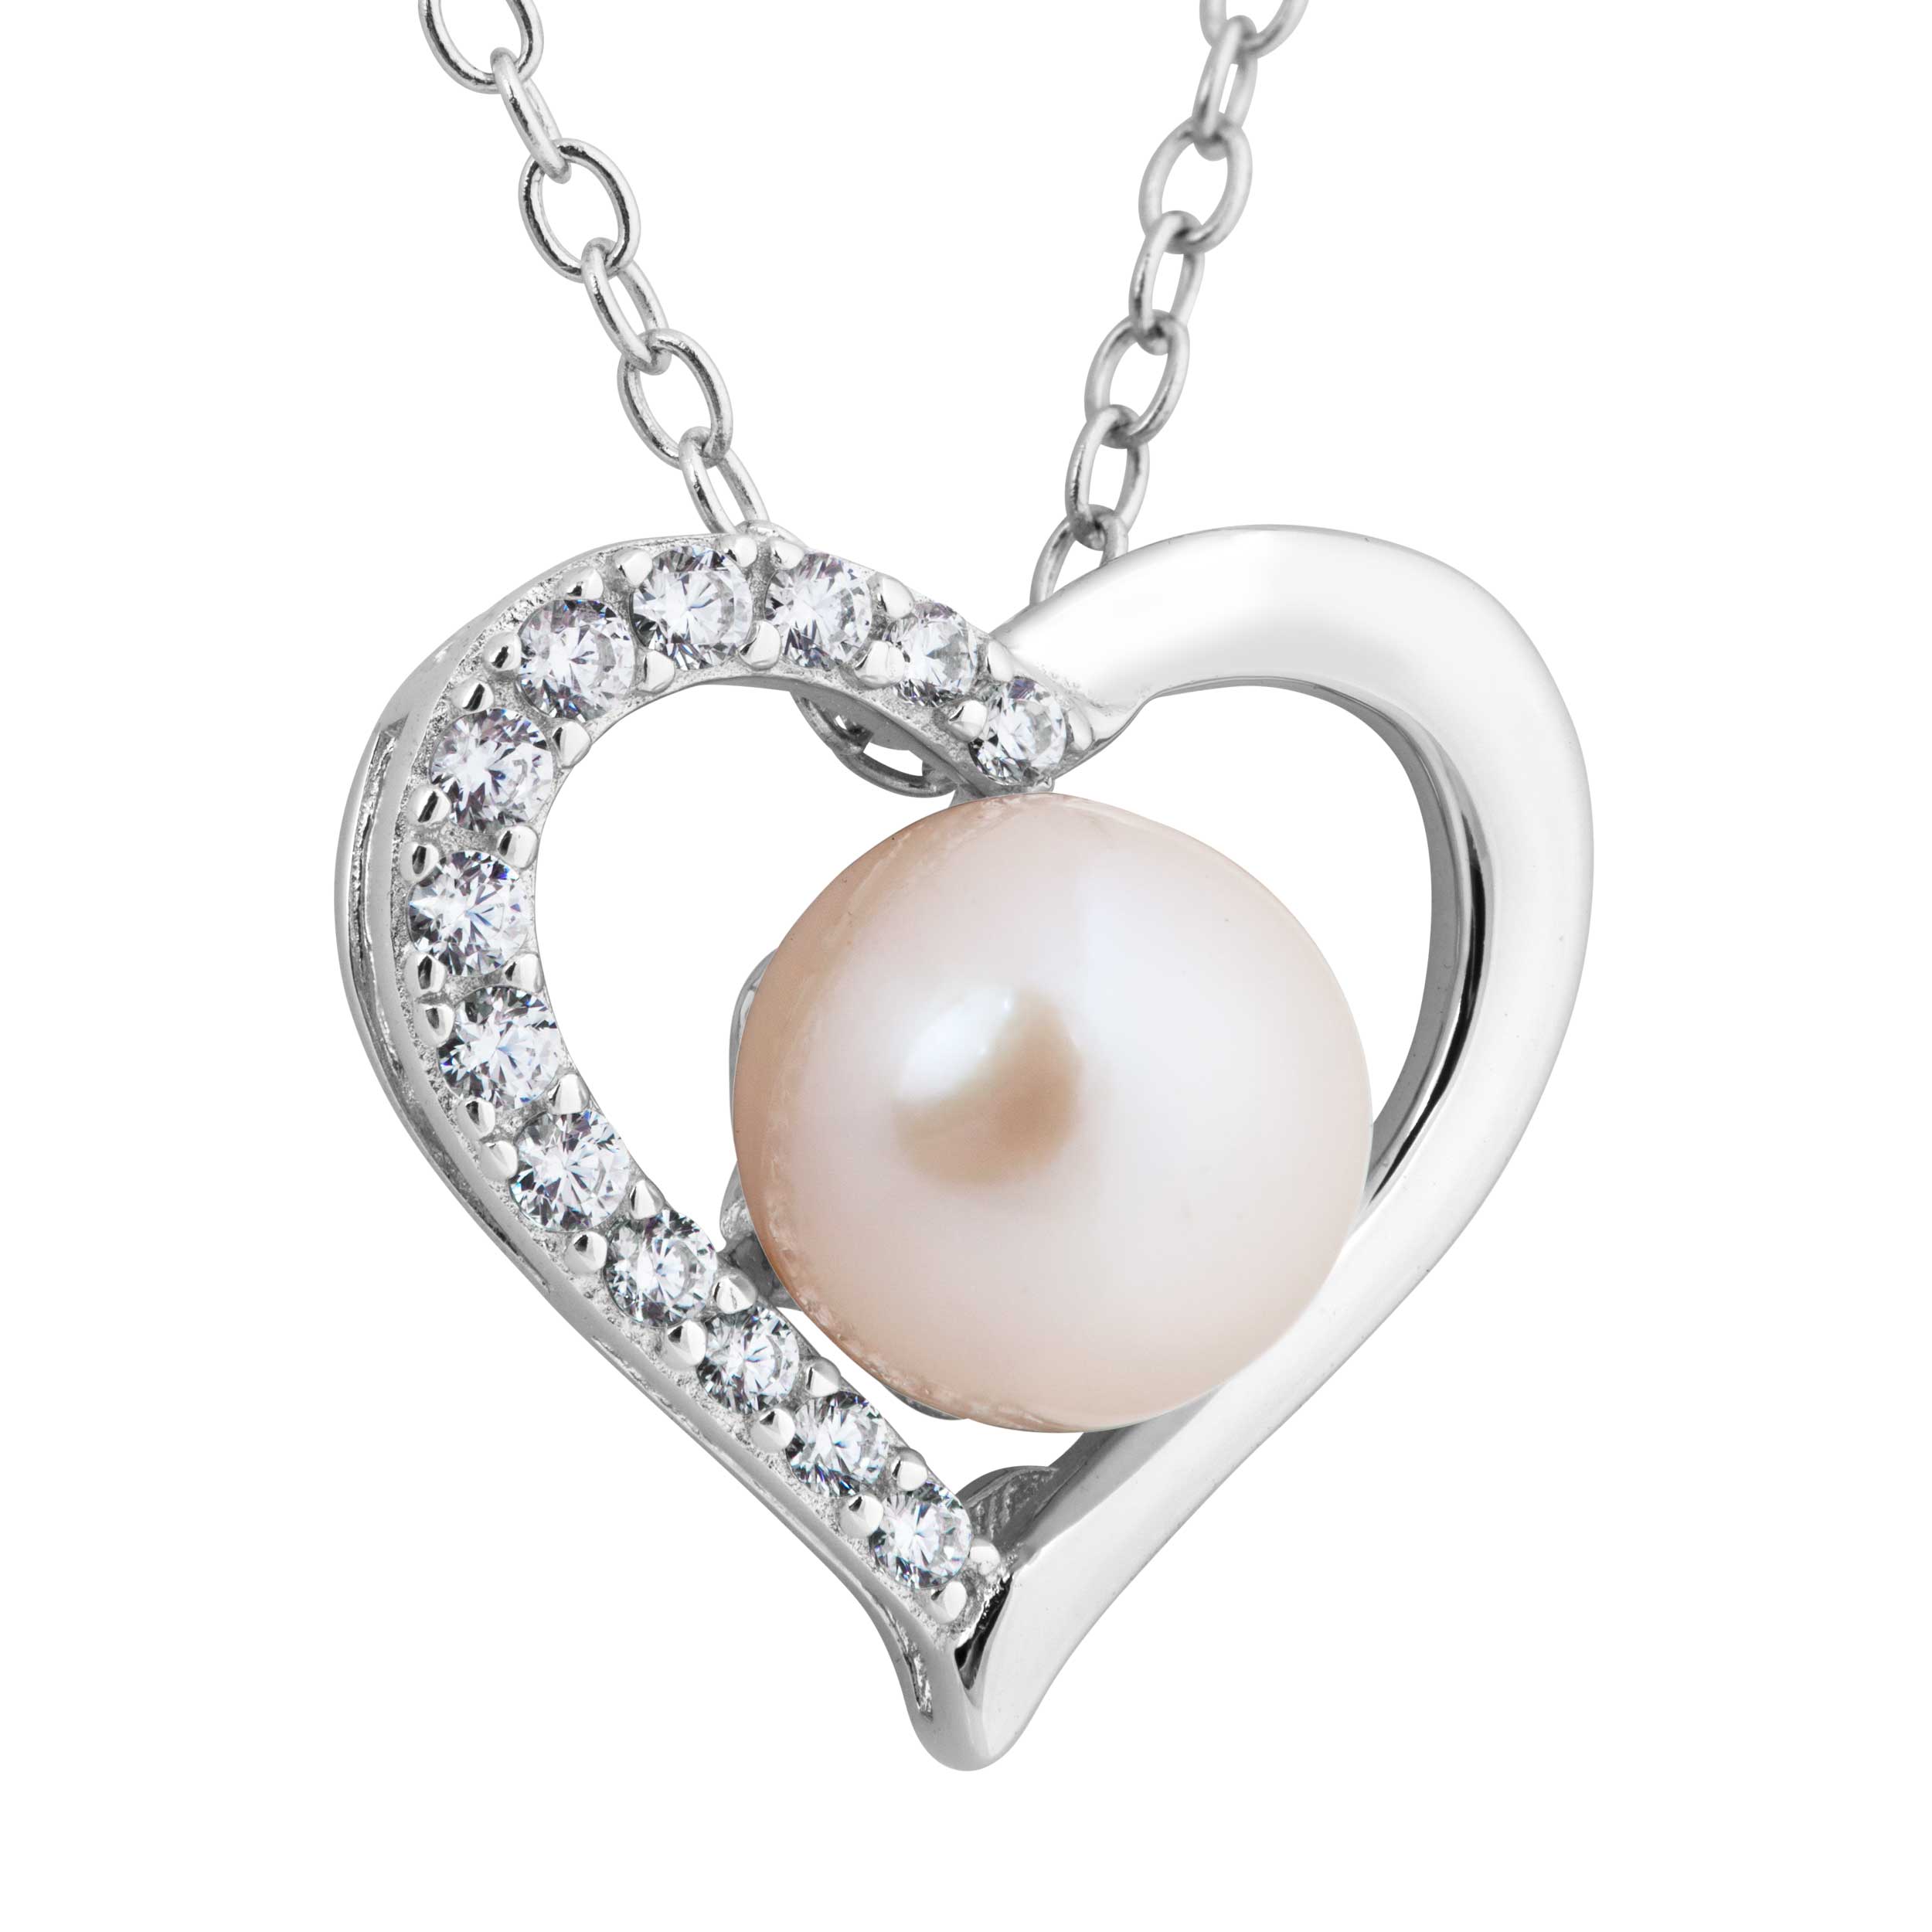 Lush Pearl in Heart with CZ's Pendant Necklace, Sterling Silver